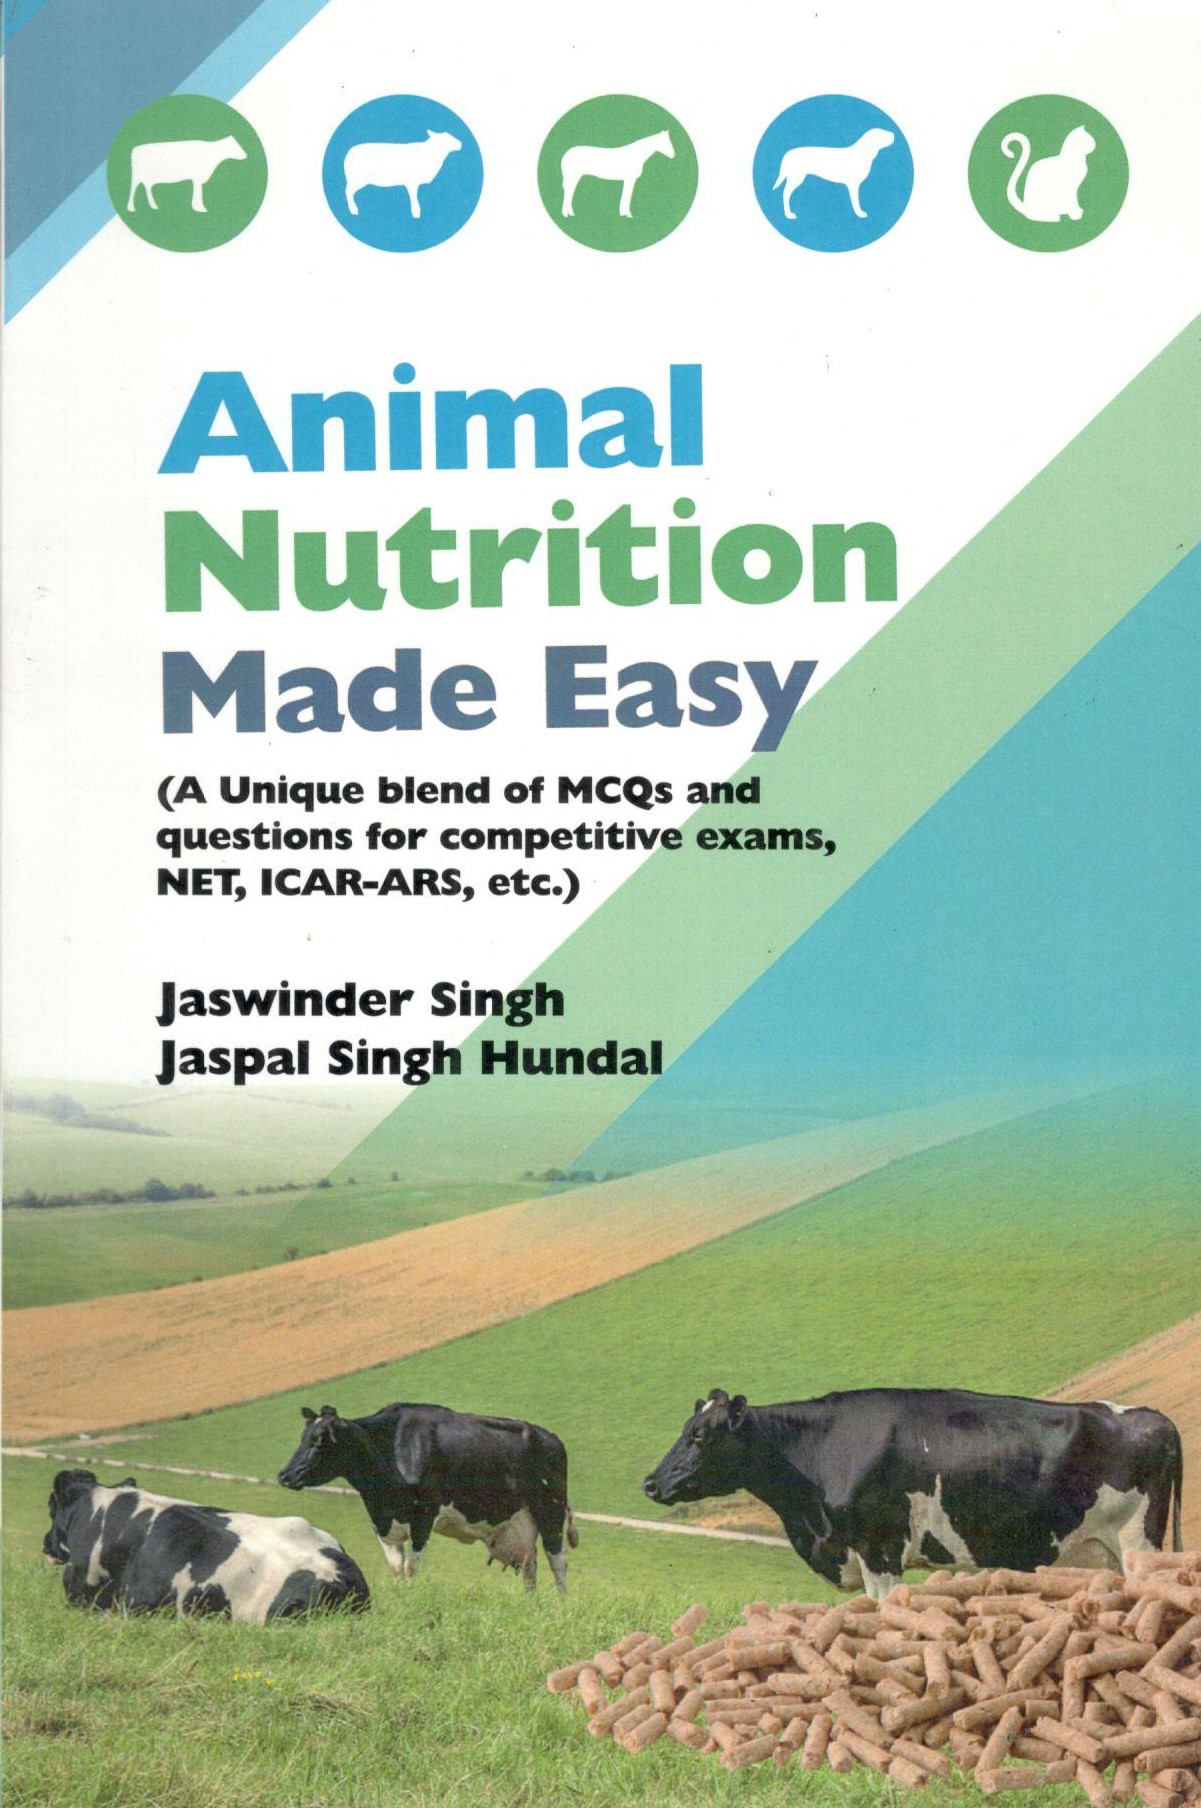 Animal Nutrition Made Easy (A Unique Blend Of MCQs & Questions For Competative Exams,NET,ICAR-ARS,Etc)